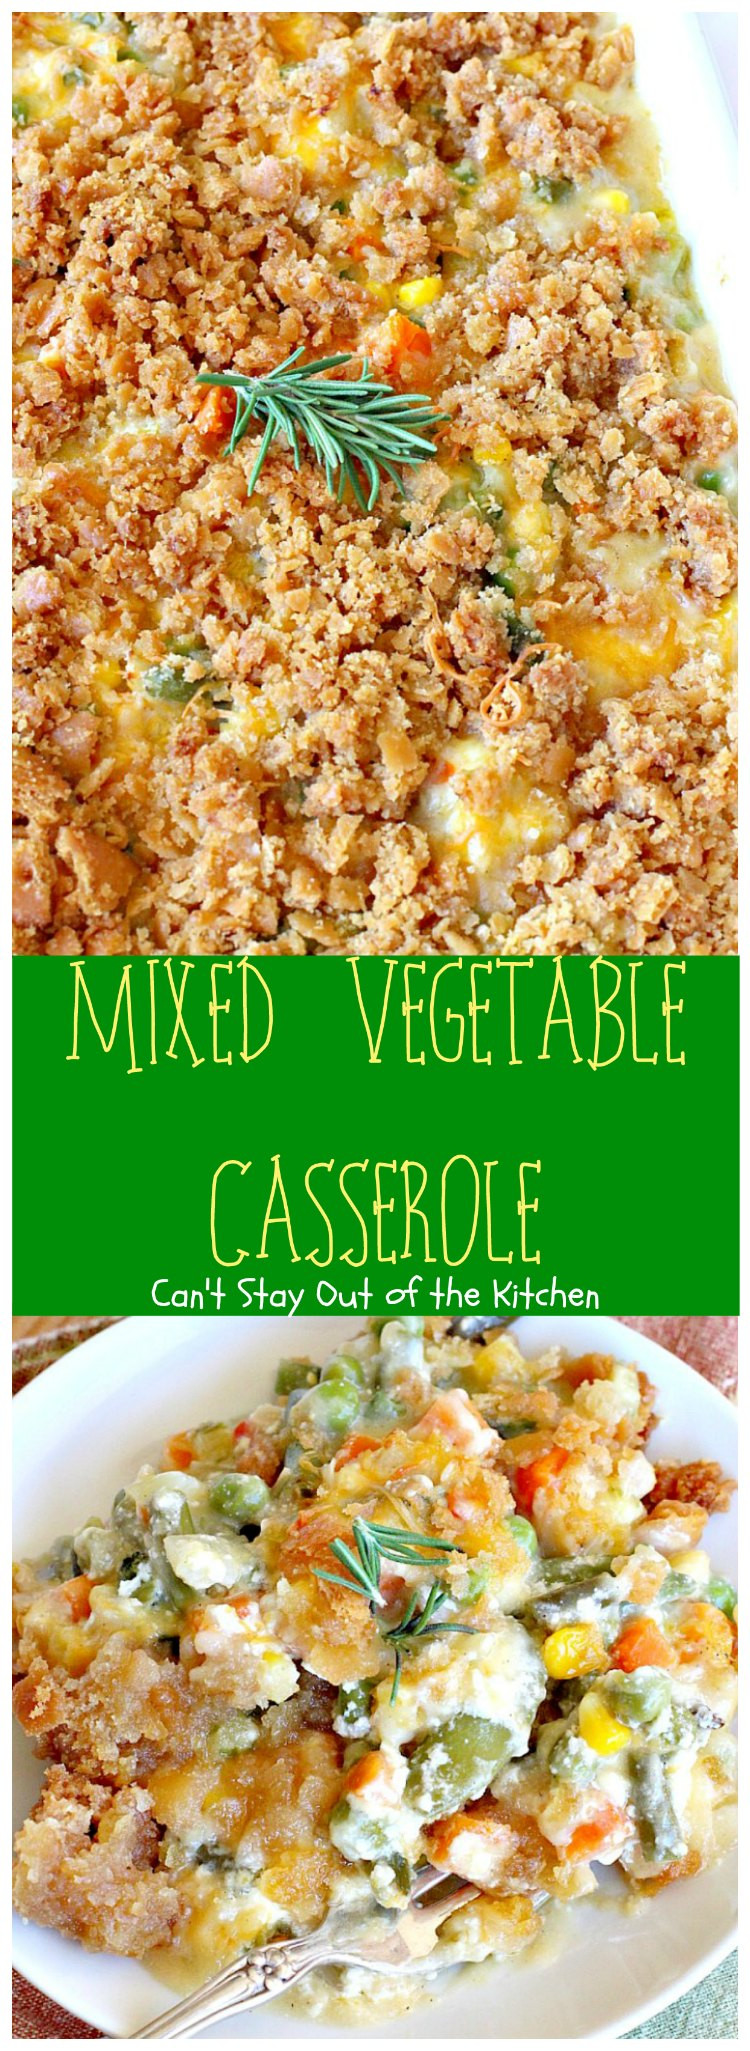 Christmas Vegetable Casserole
 Mixed Ve able Casserole Can t Stay Out of the Kitchen